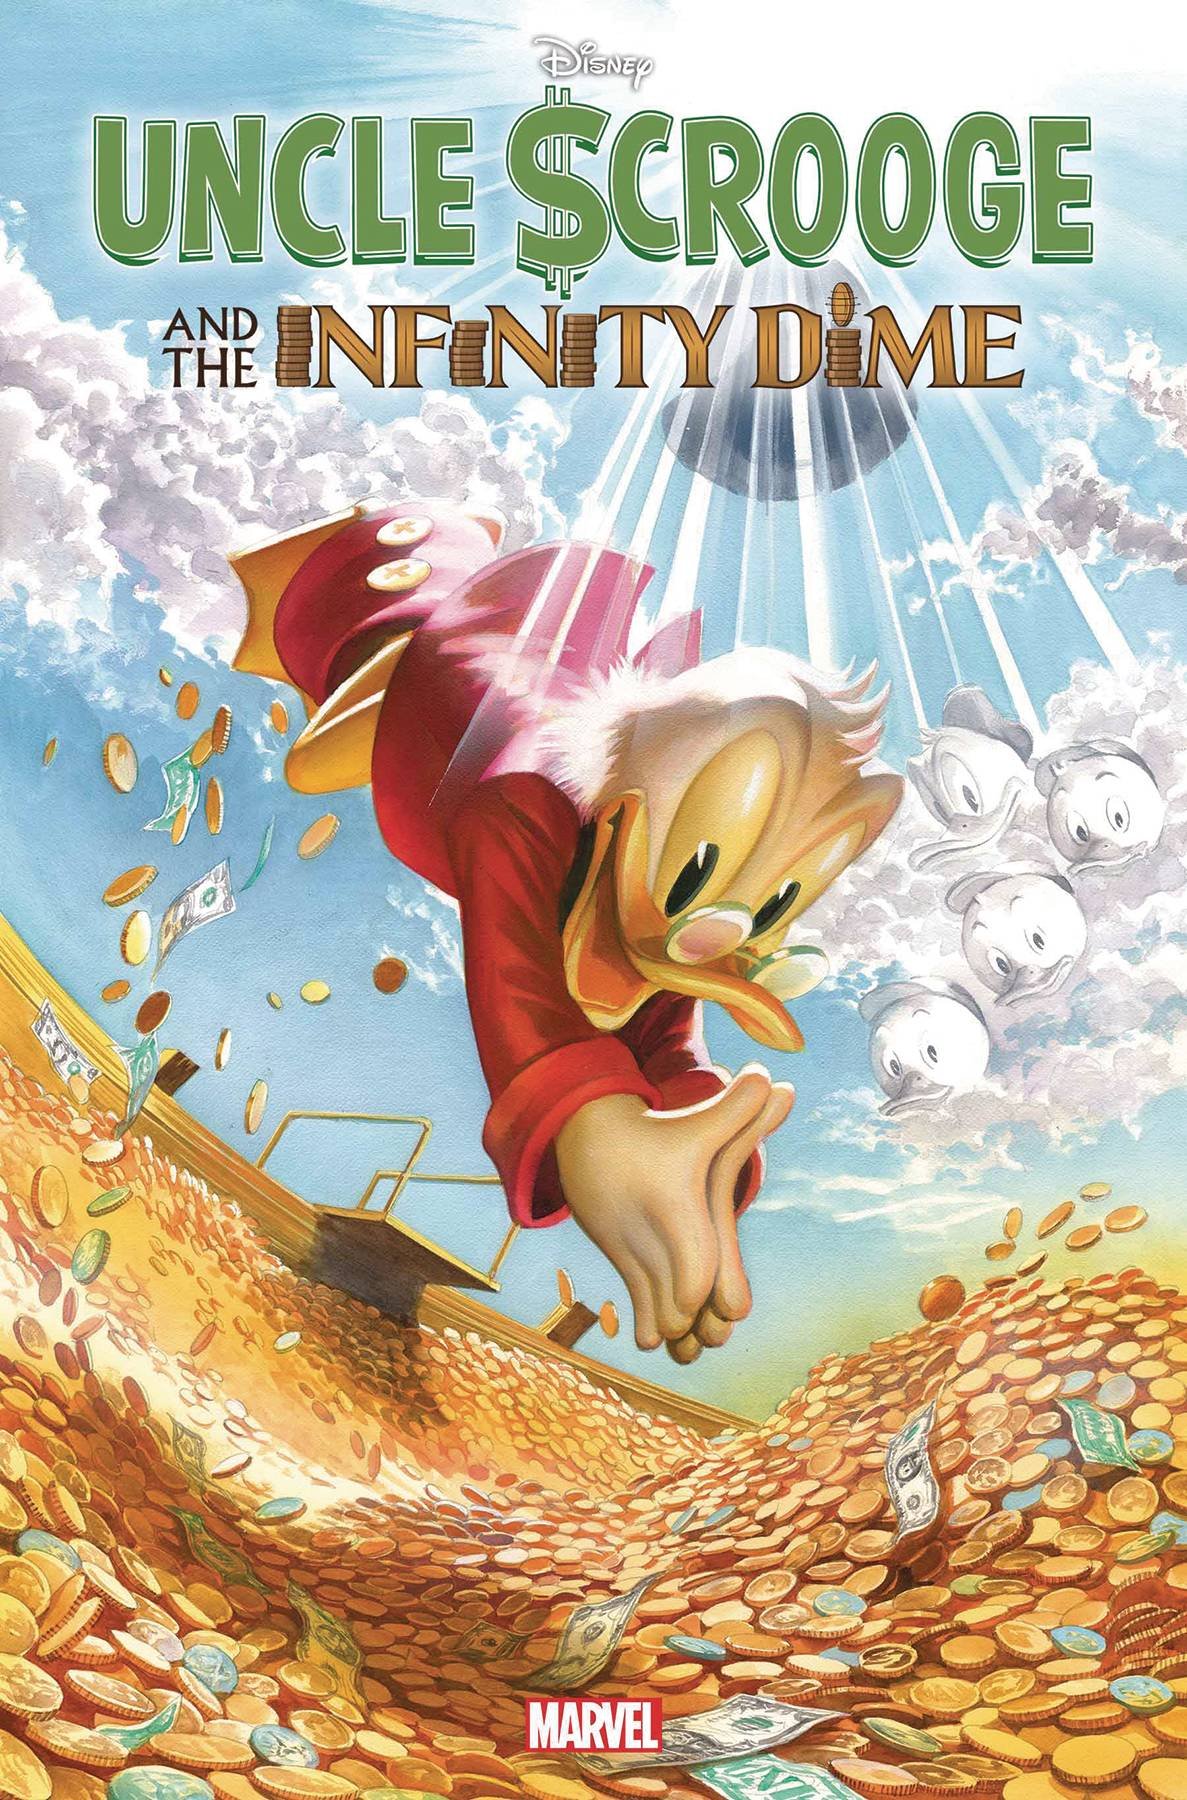 Apr 24 Uncle Scrooge and the Infinity Dime.jpg